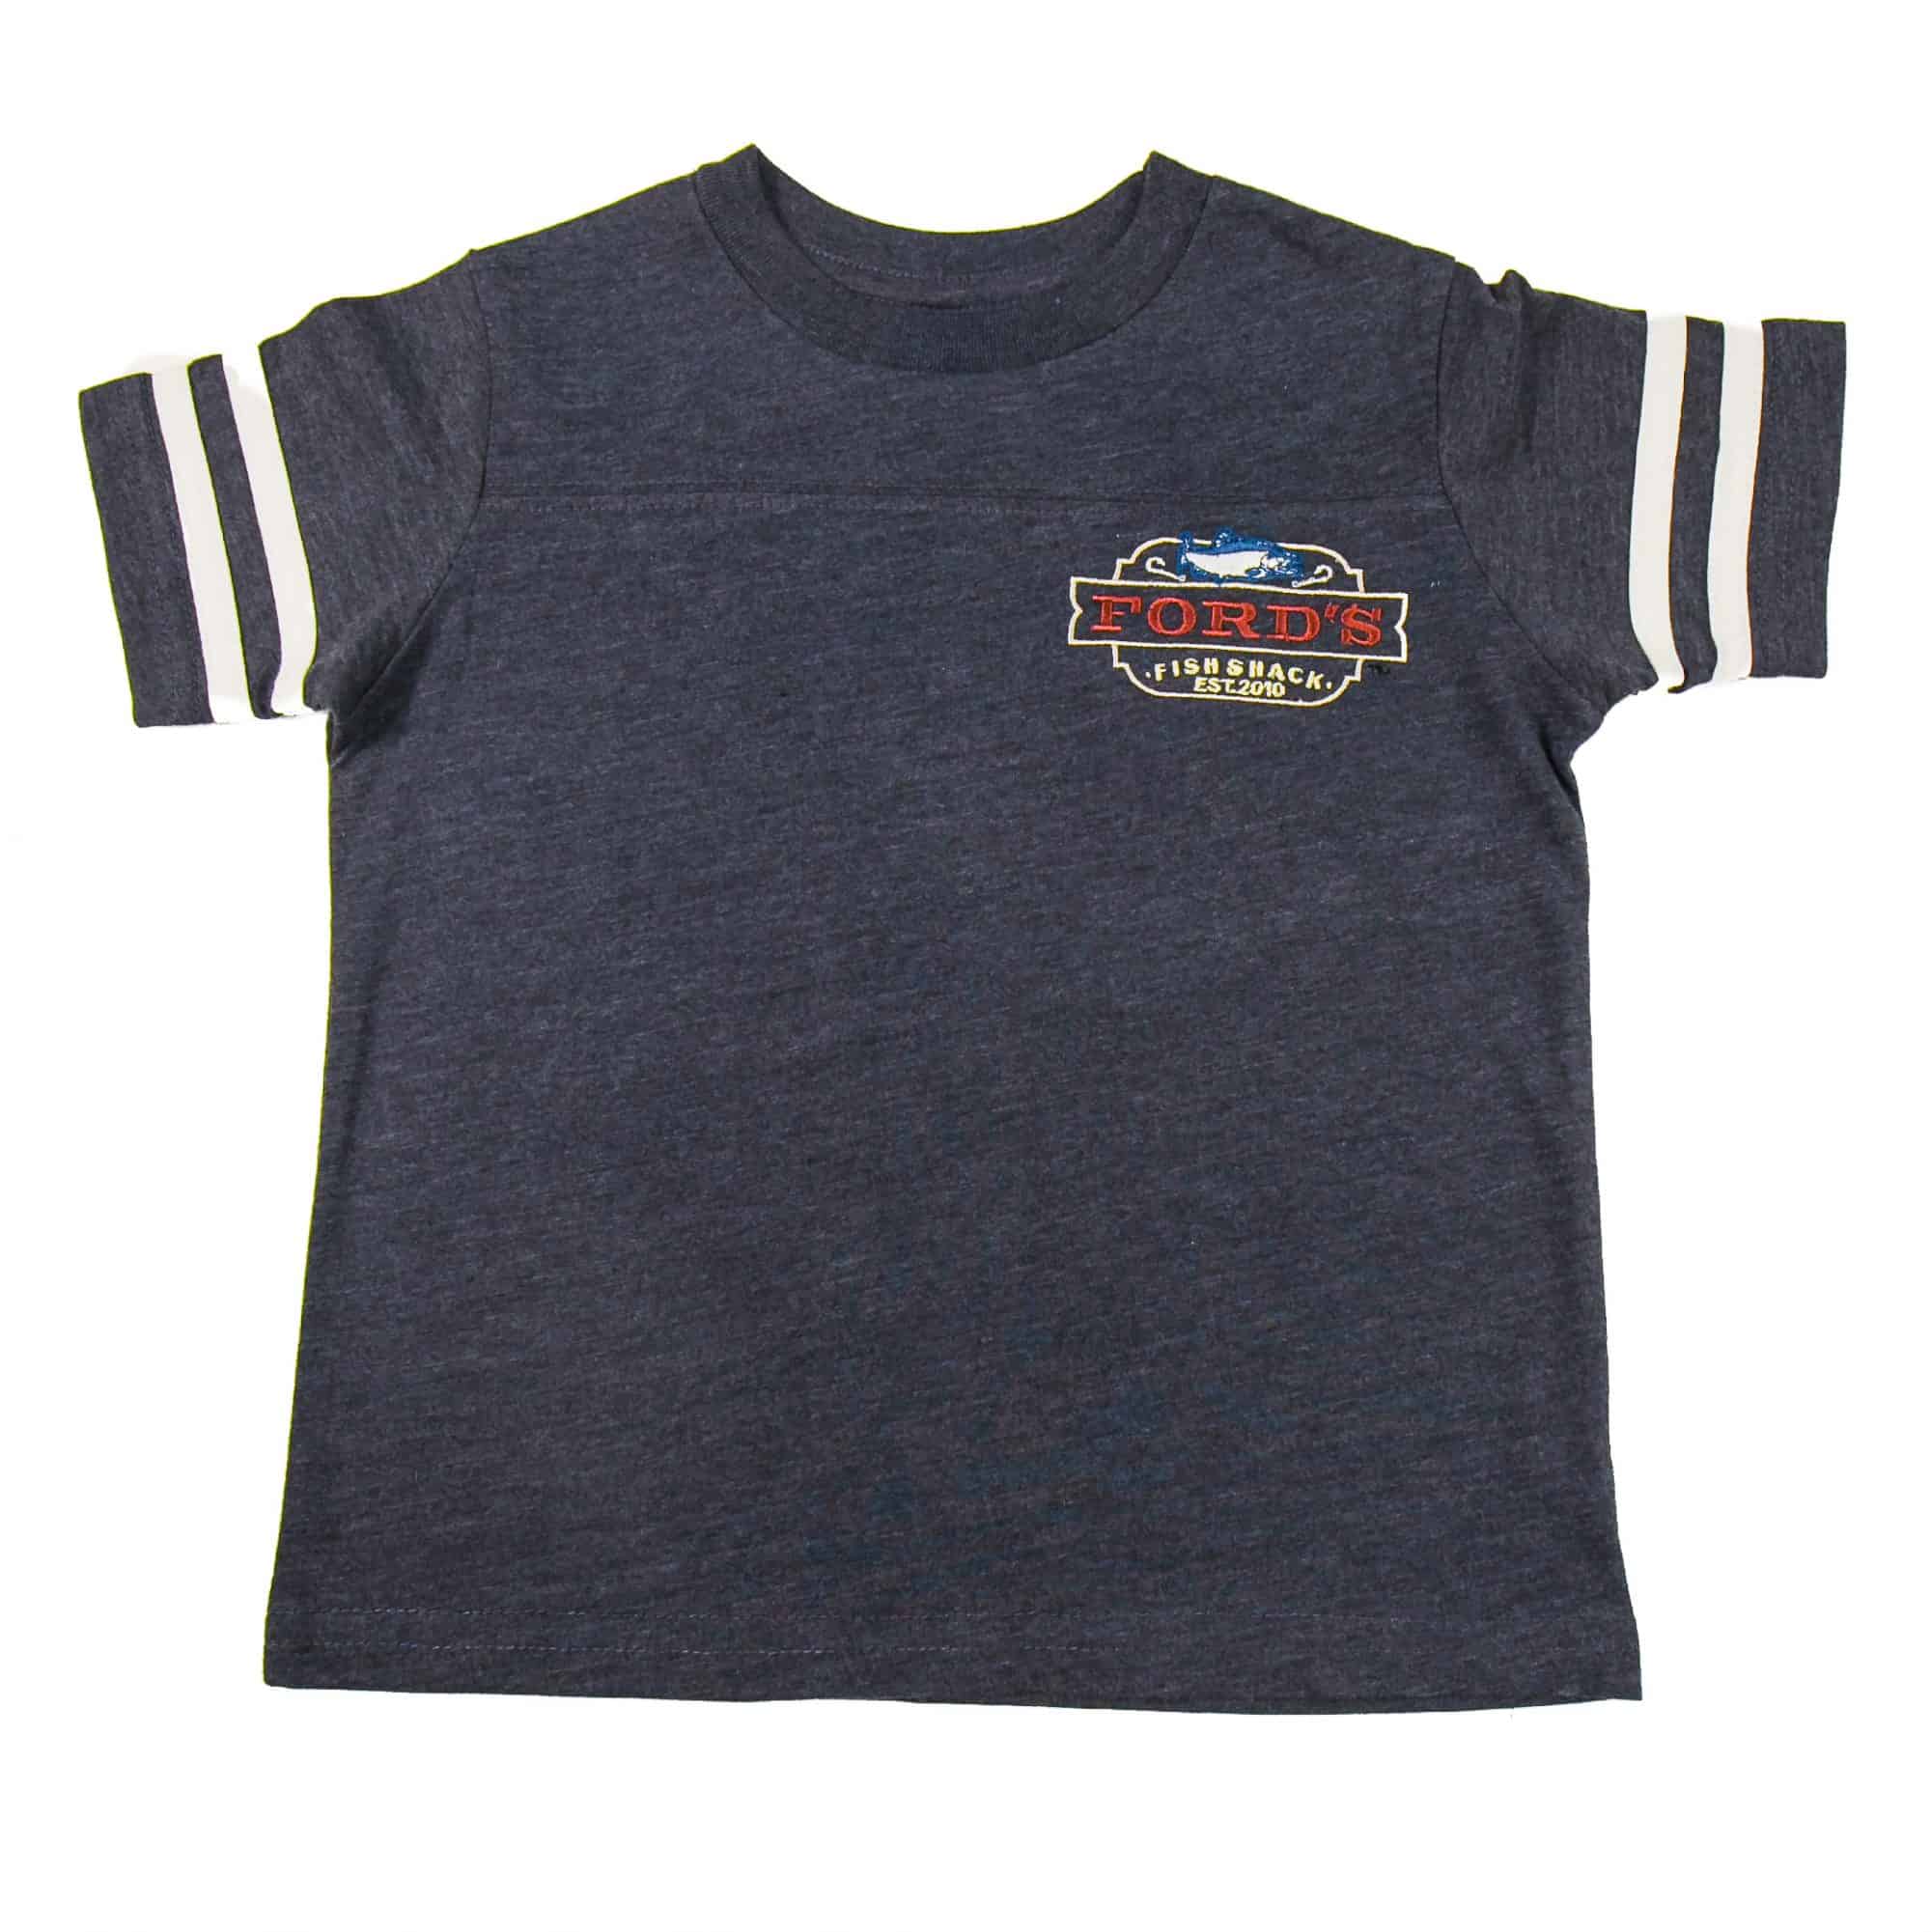 Toddler Football Jersey T-Shirt - Ford's Fish Shack